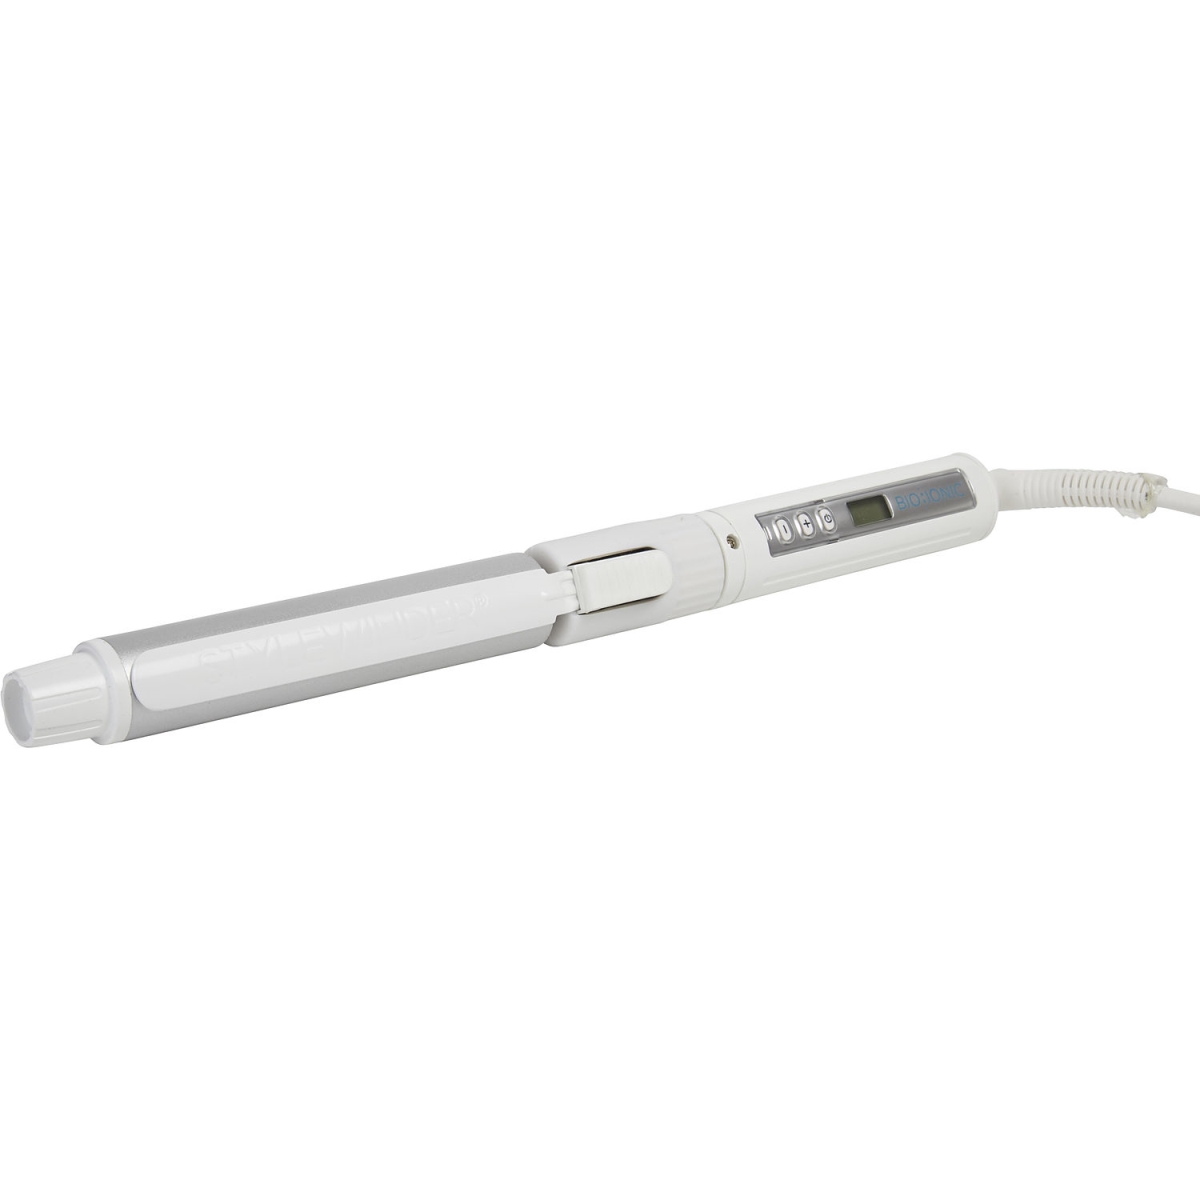 338781 1 In. Unisex Stylewinder Rotating Iron Styling Tool, White